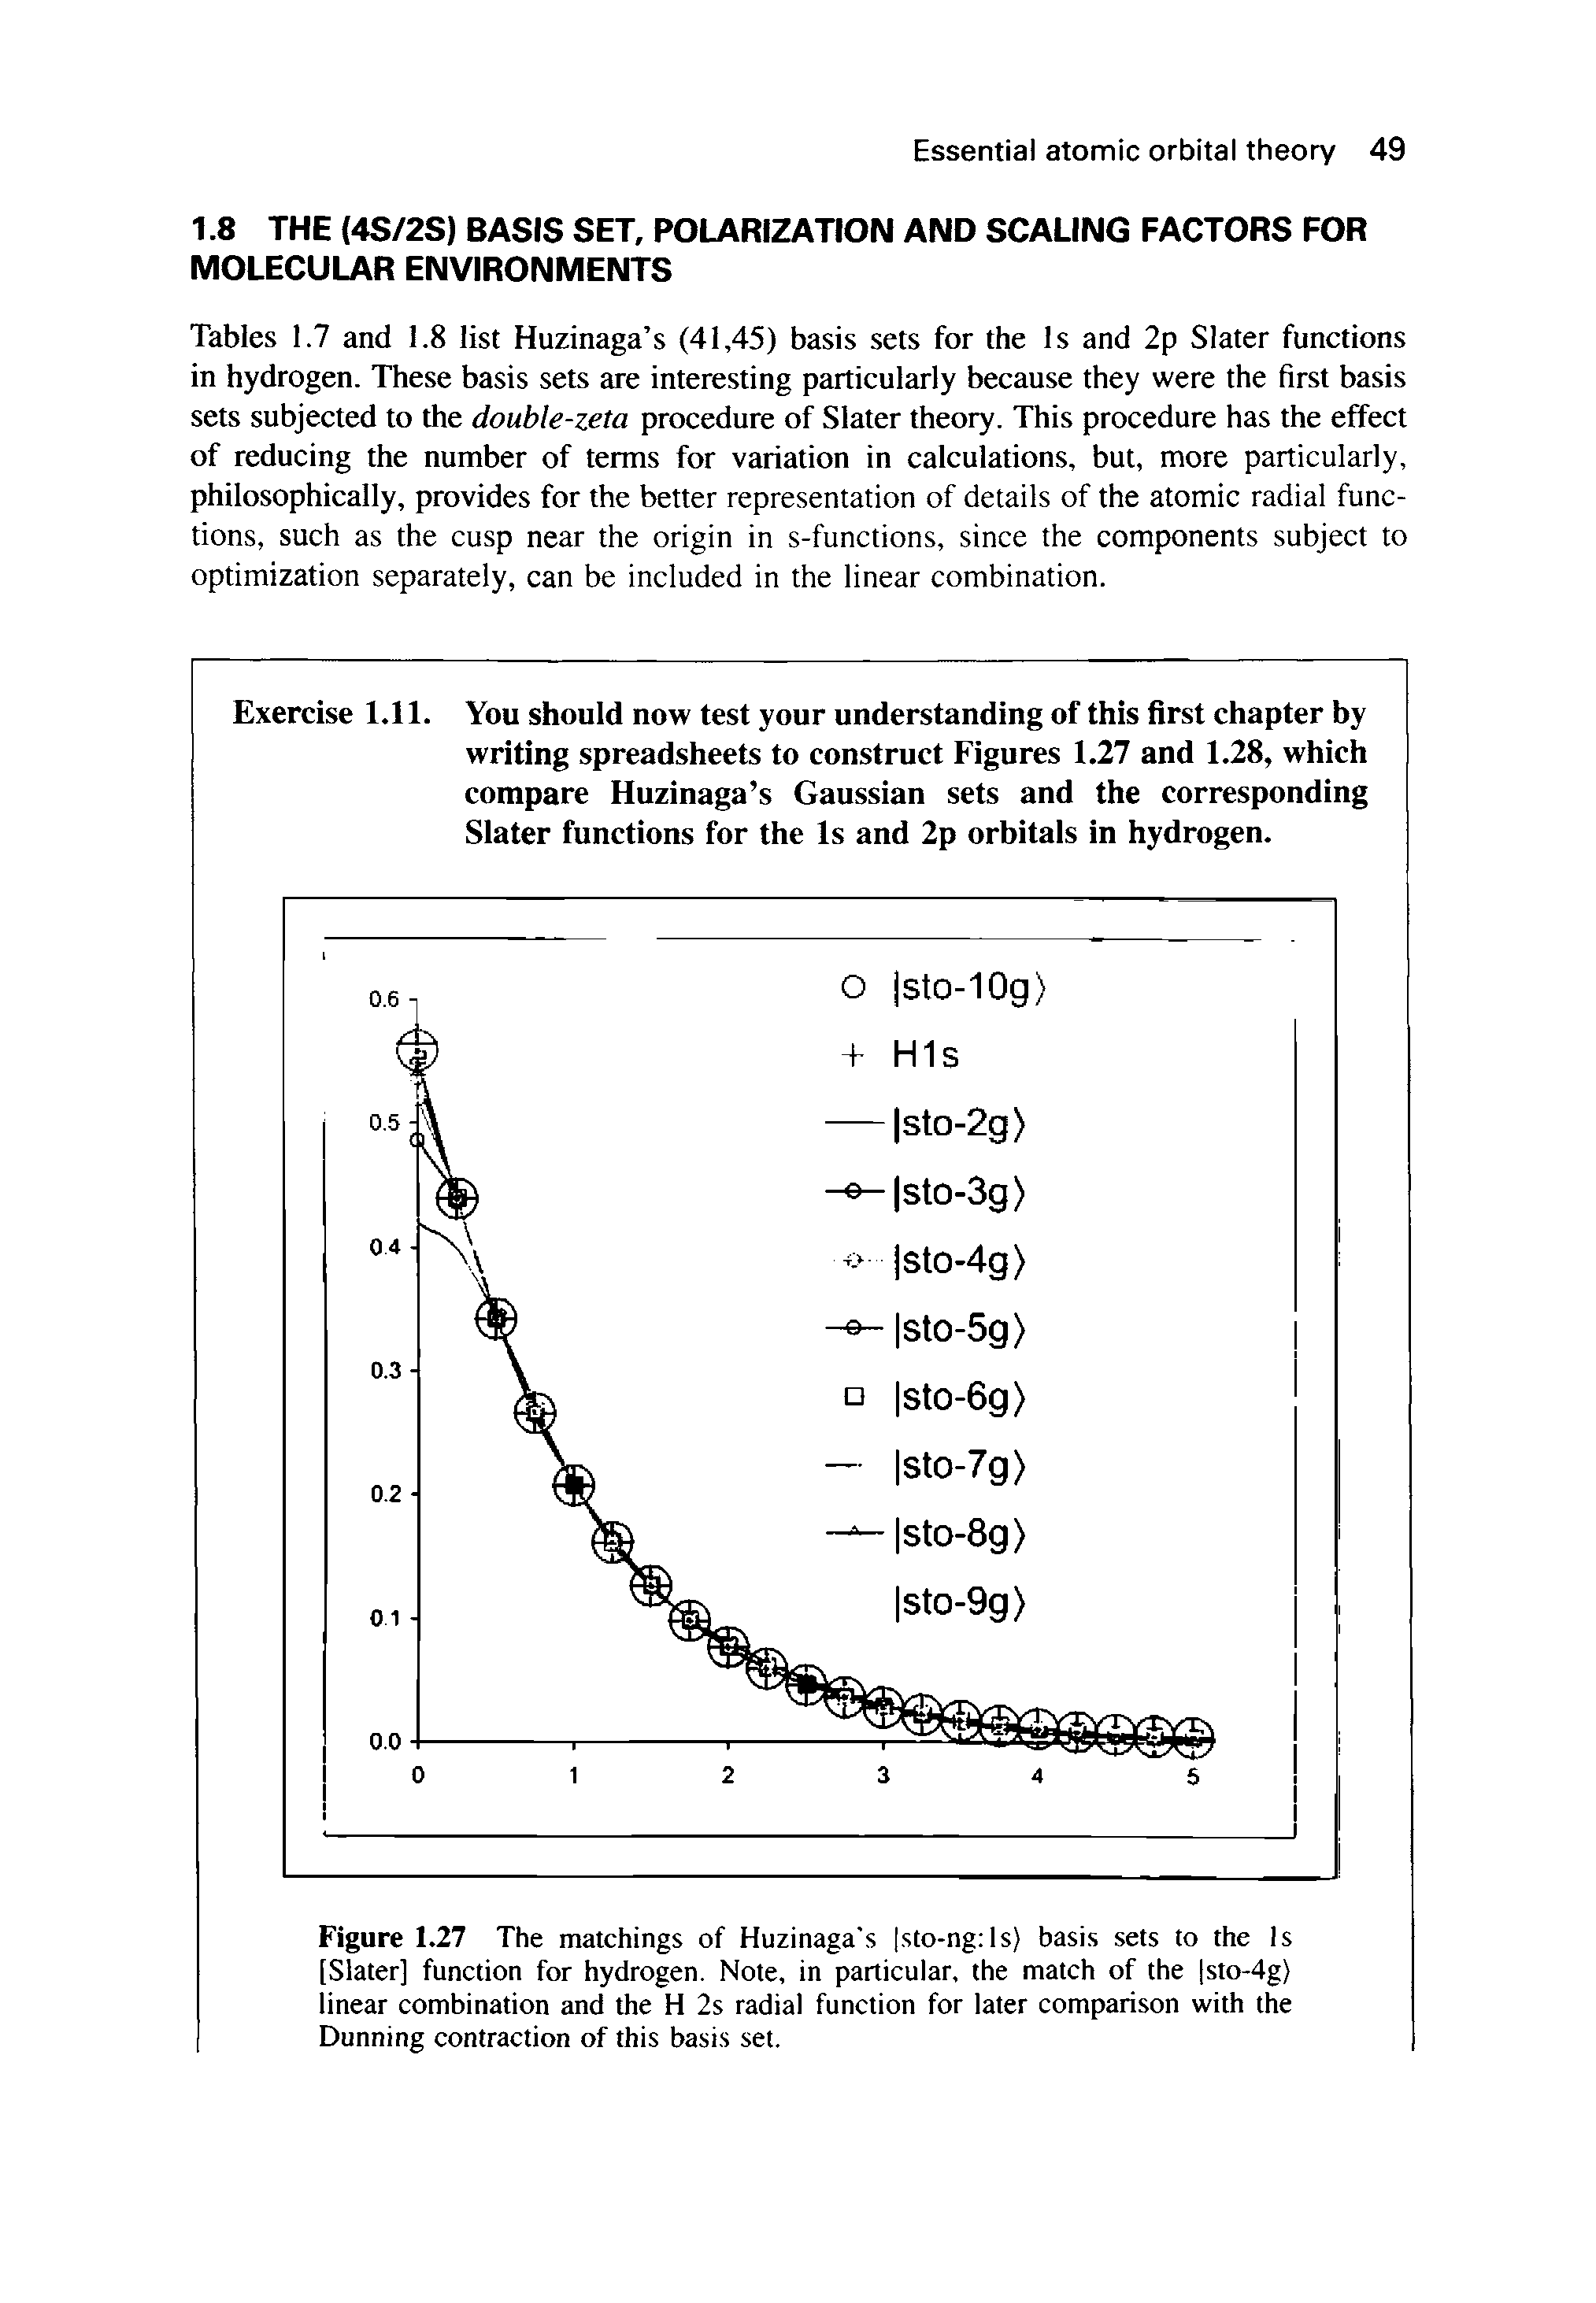 Figure 1.27 The matchings of Huzinaga s sto-ng ls) basis sets to the Is [Slater] function for hydrogen. Note, in particular, the match of the sto-4g) linear combination and the H 2s radial function for later comparison with the Dunning contraction of this basis set.